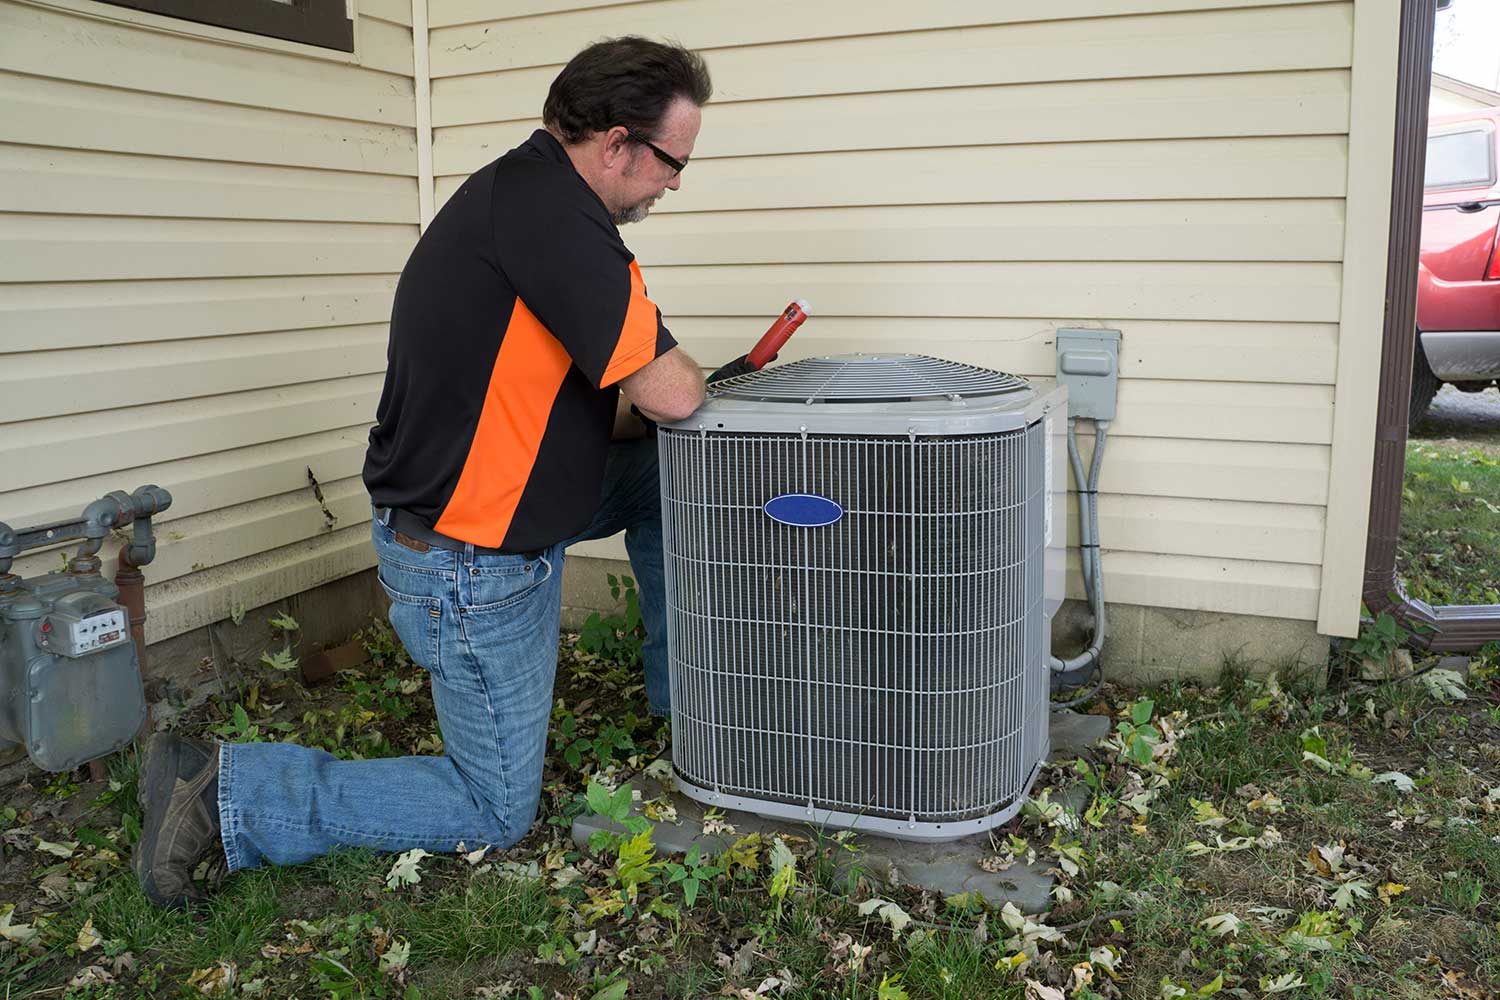 Personal Heating and Air Conditioning systems.